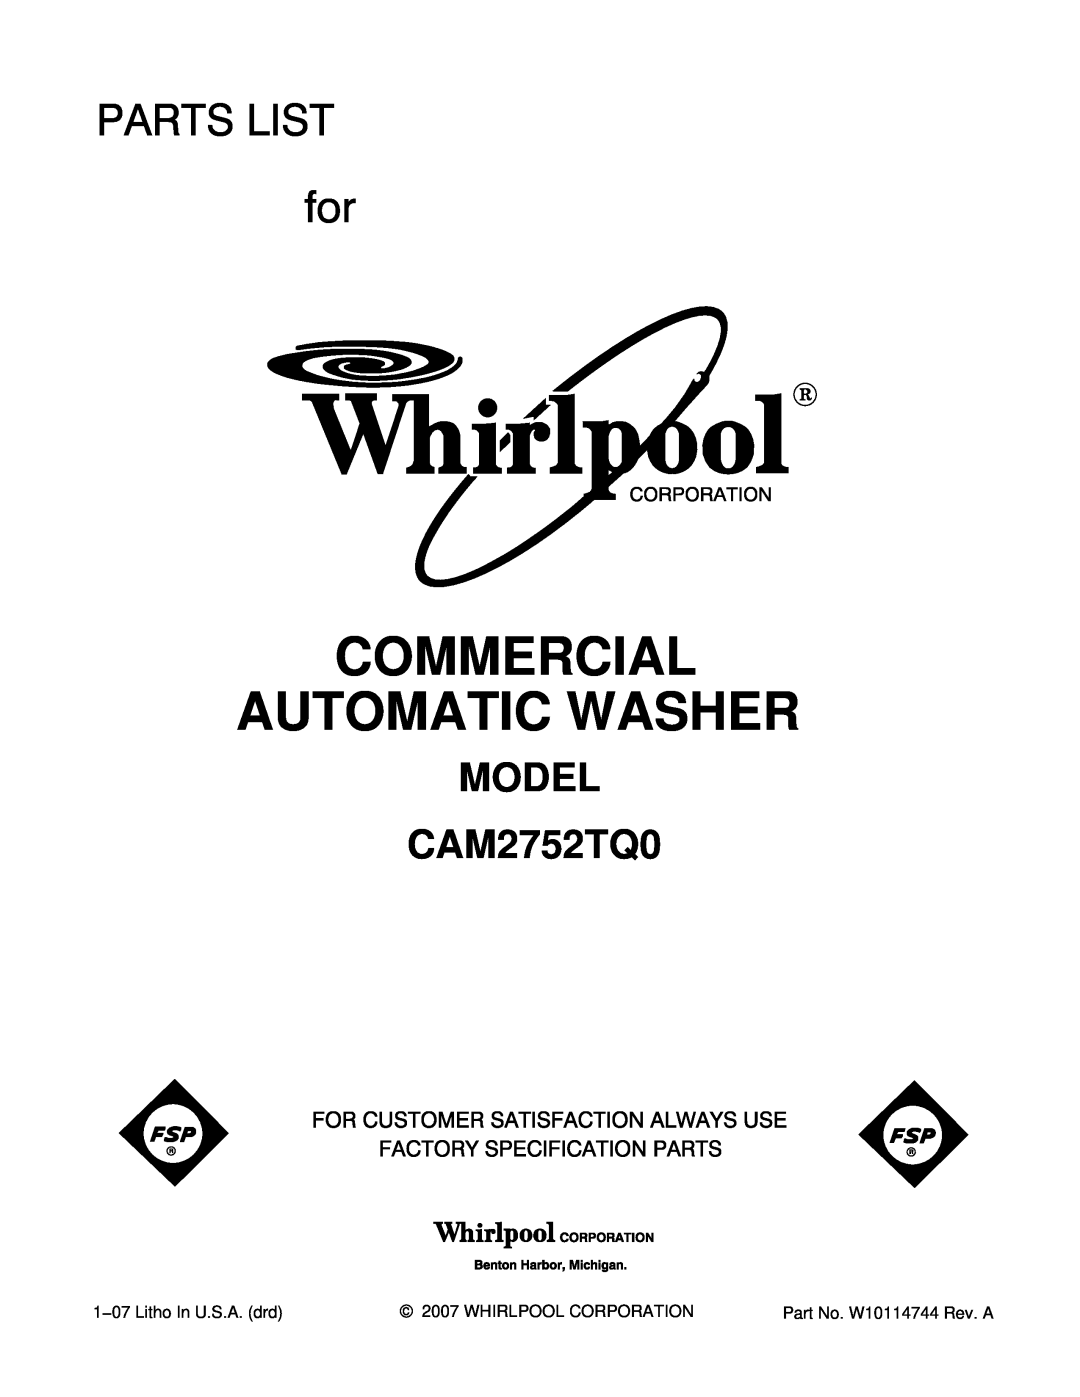 Whirlpool manual Commercial Automatic Washer, MODEL CAM2752TQ0, Part No. W10114744 Rev. A 